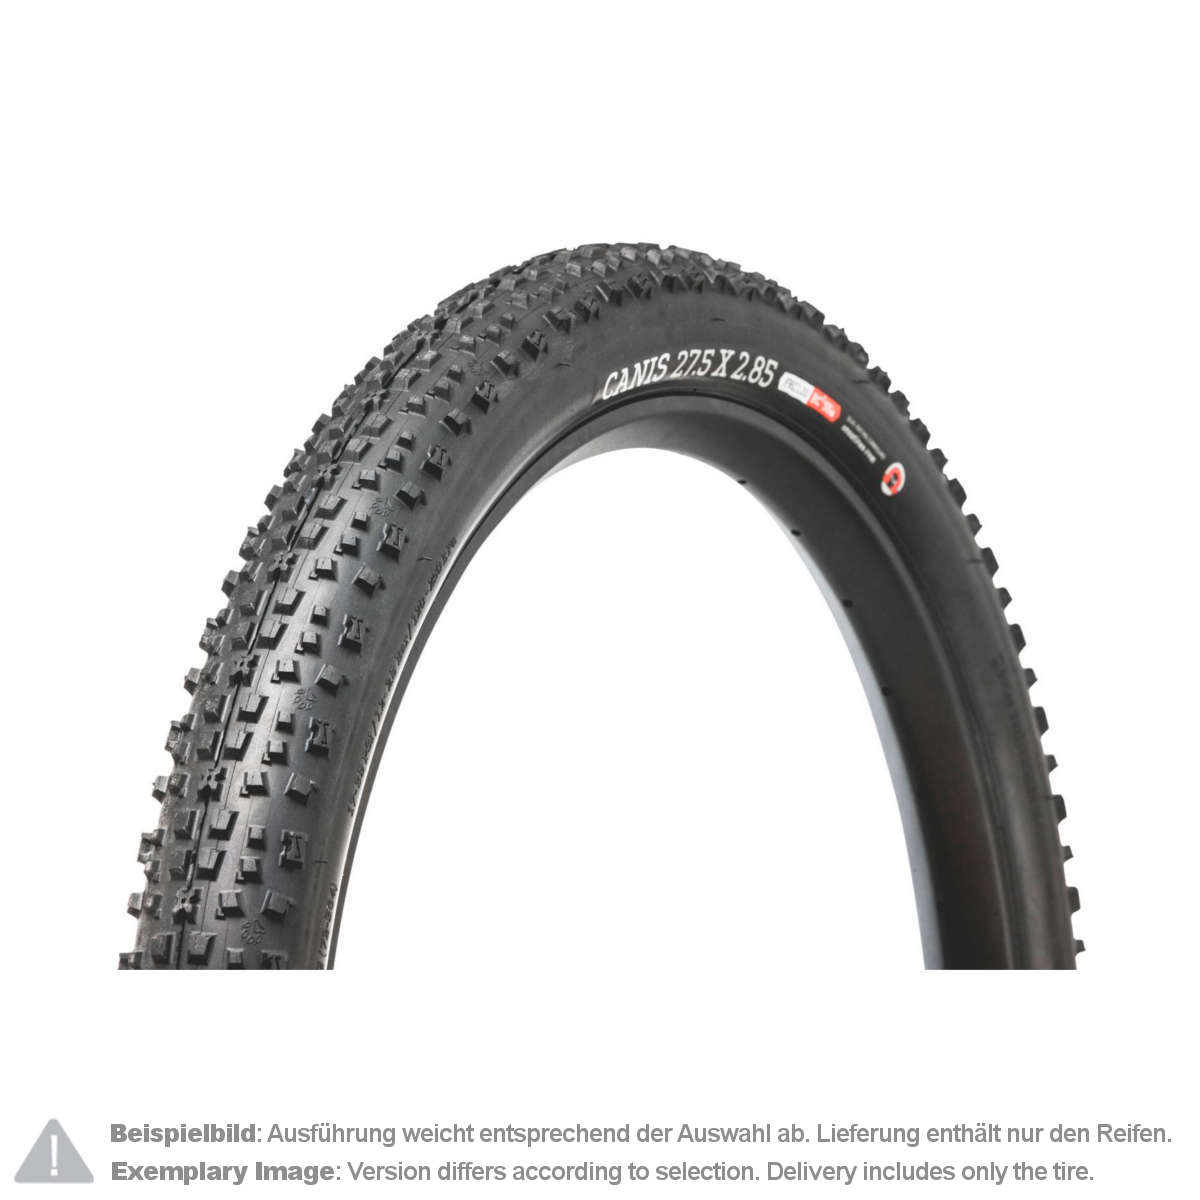 Onza MTB Tire Canis Black, 27.5 x 2.85 Inch, Tubeless Ready, 120 TPI, FRC120, 65a/55a, Foldable